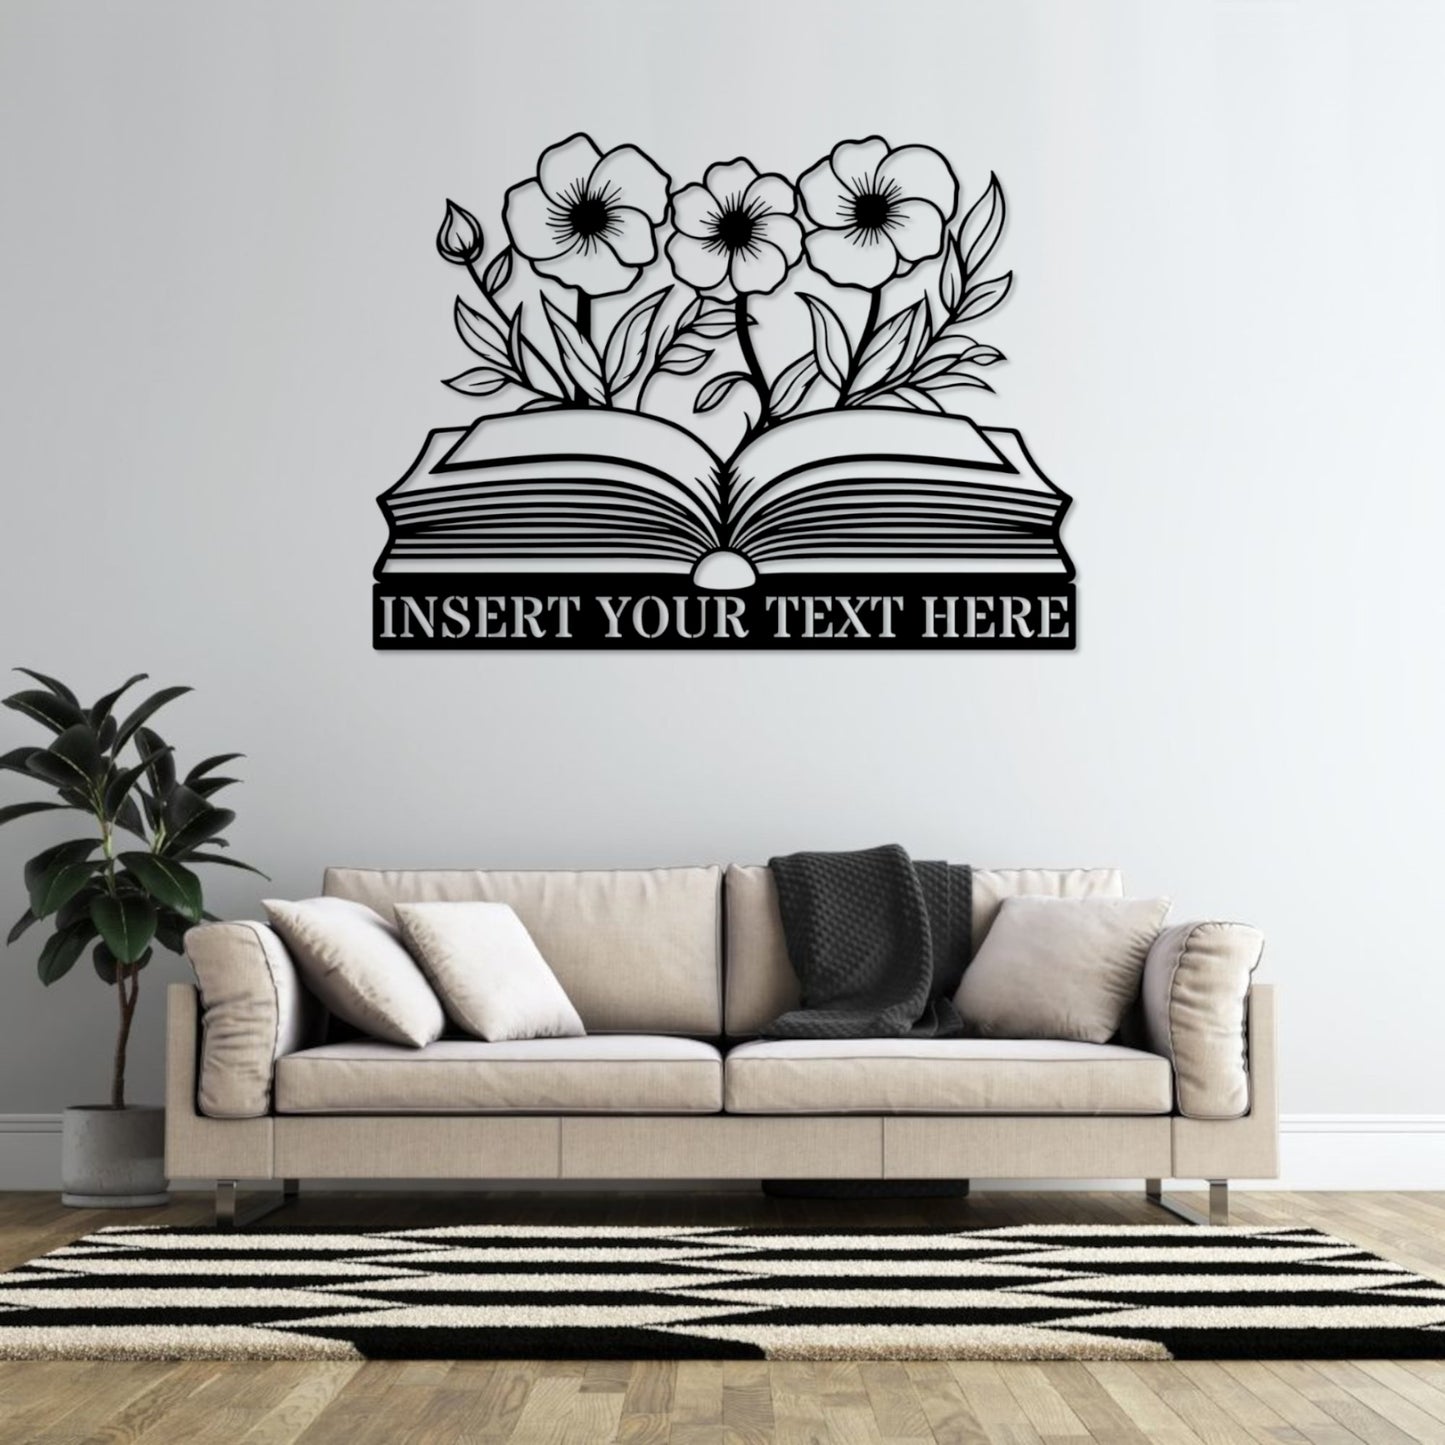 Personalized Home Library Name Metal Art Sign. Custom Book Lover Wall Decor Gift. Teacher Gift Wall Hanging. Customized Home Library Sign